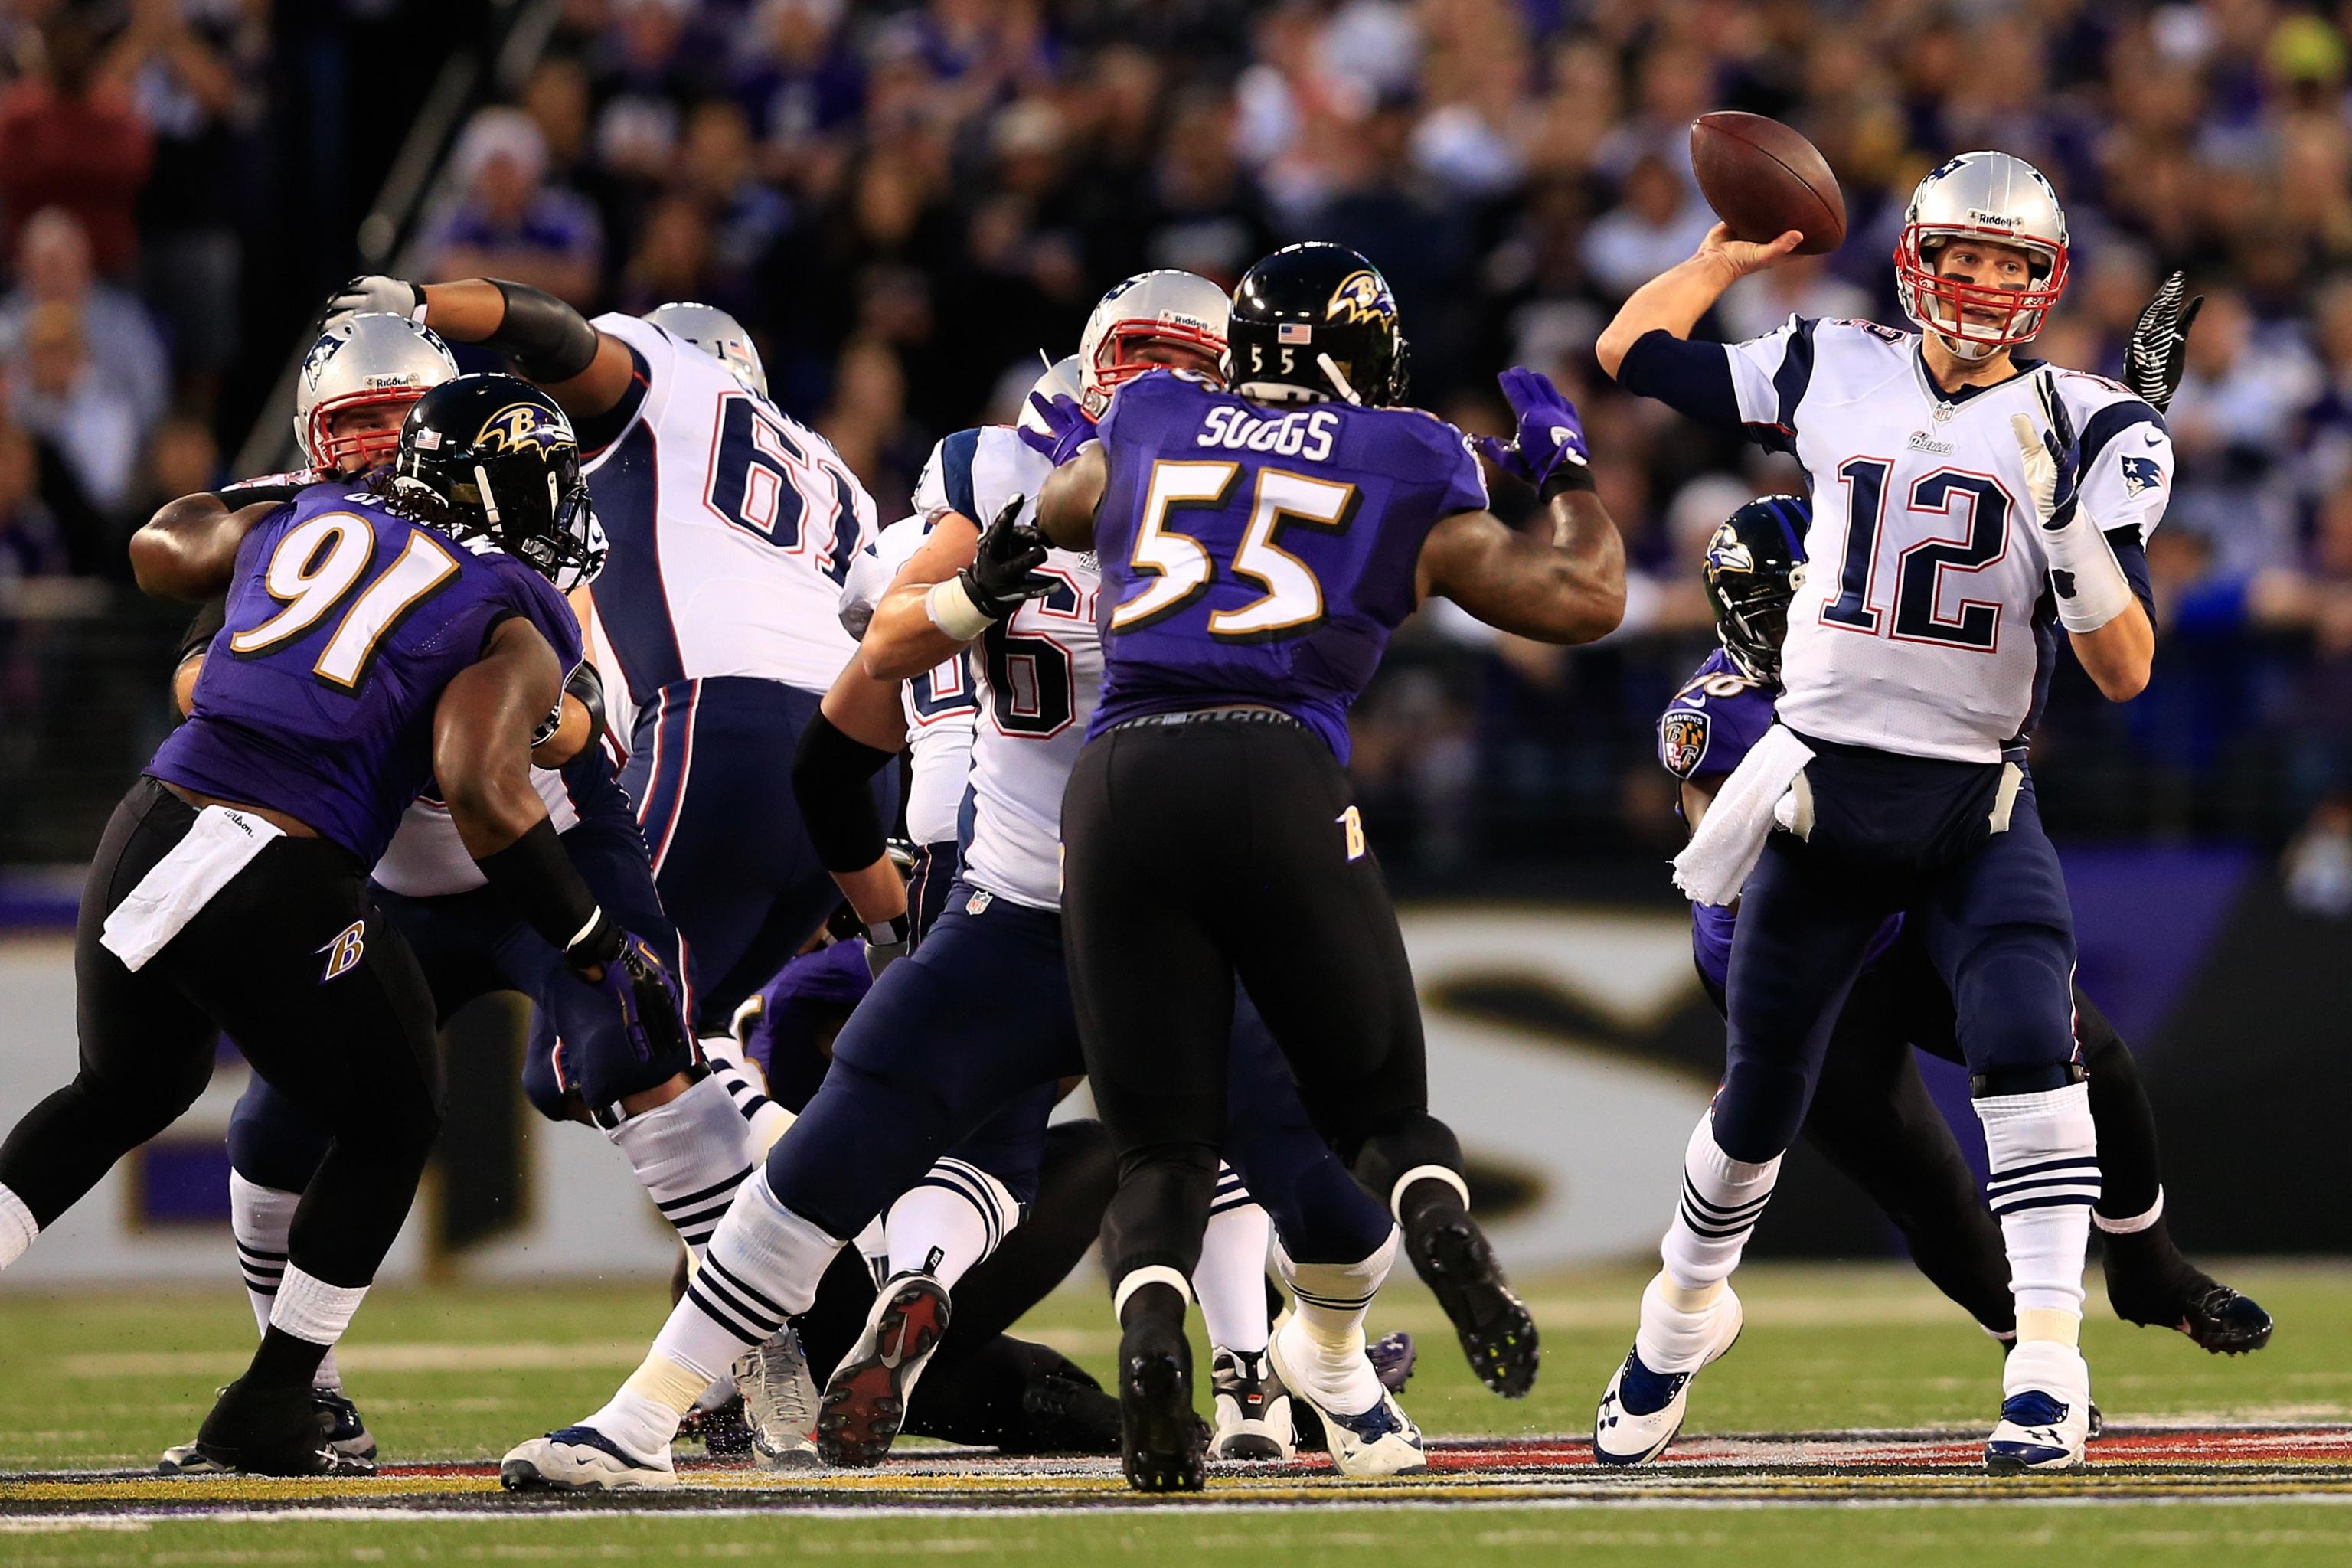 Patriots Playoffs: No Carryover From 2012 AFC Championship Game